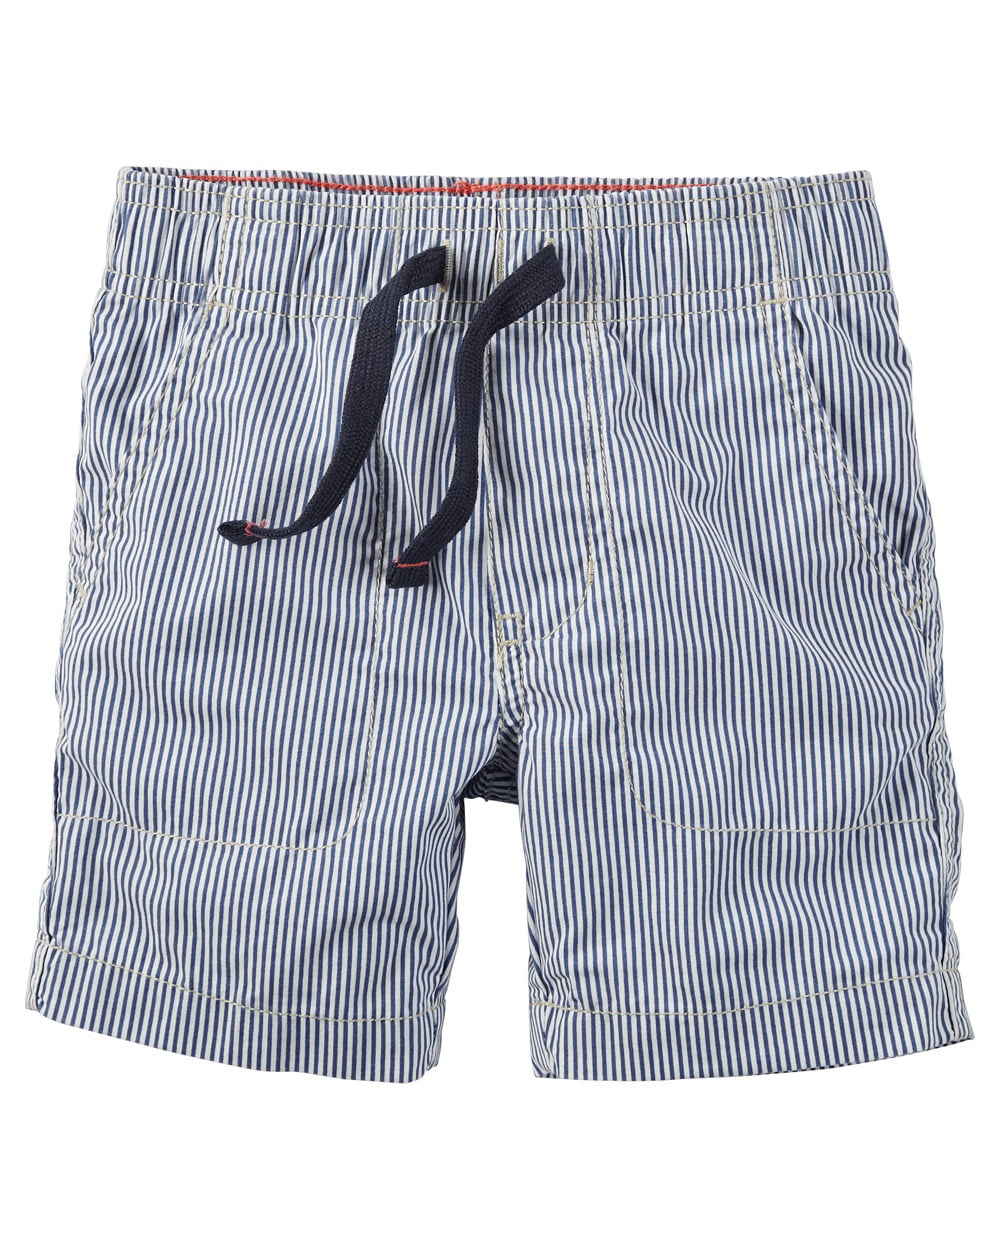 NEW-BABY GAP-Baby Boy-Size 3-6 Month-Navy Blue-Pull on-shorts 